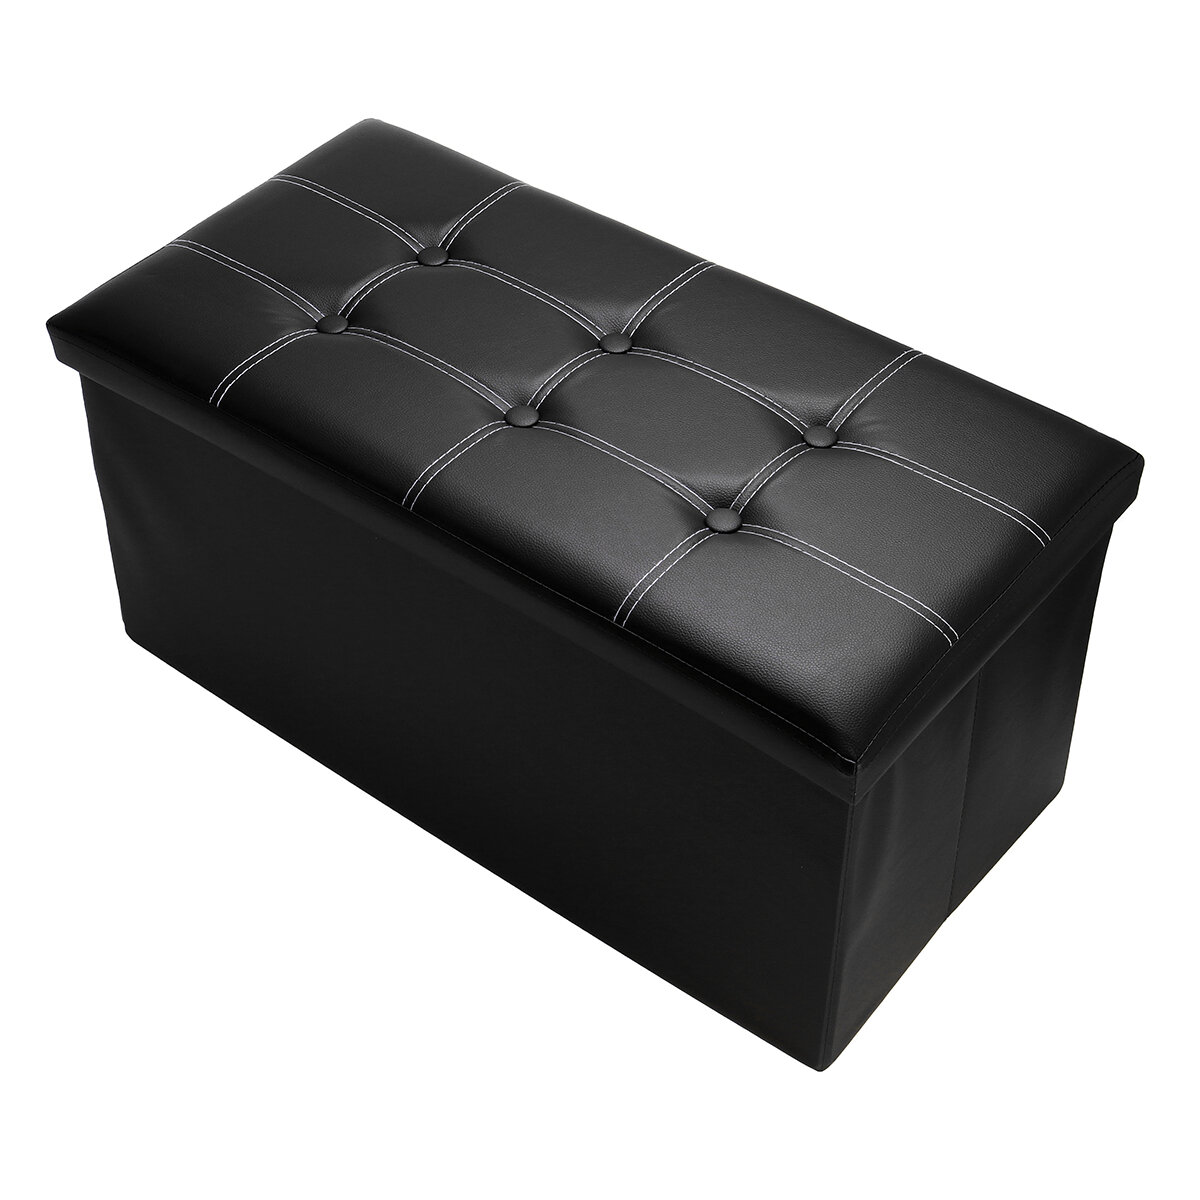 

PU Leather Storage Stool Multifunctional Sofa Ottoman Footrest Storage Bench Box Seat Footstool Square Chair Home Office